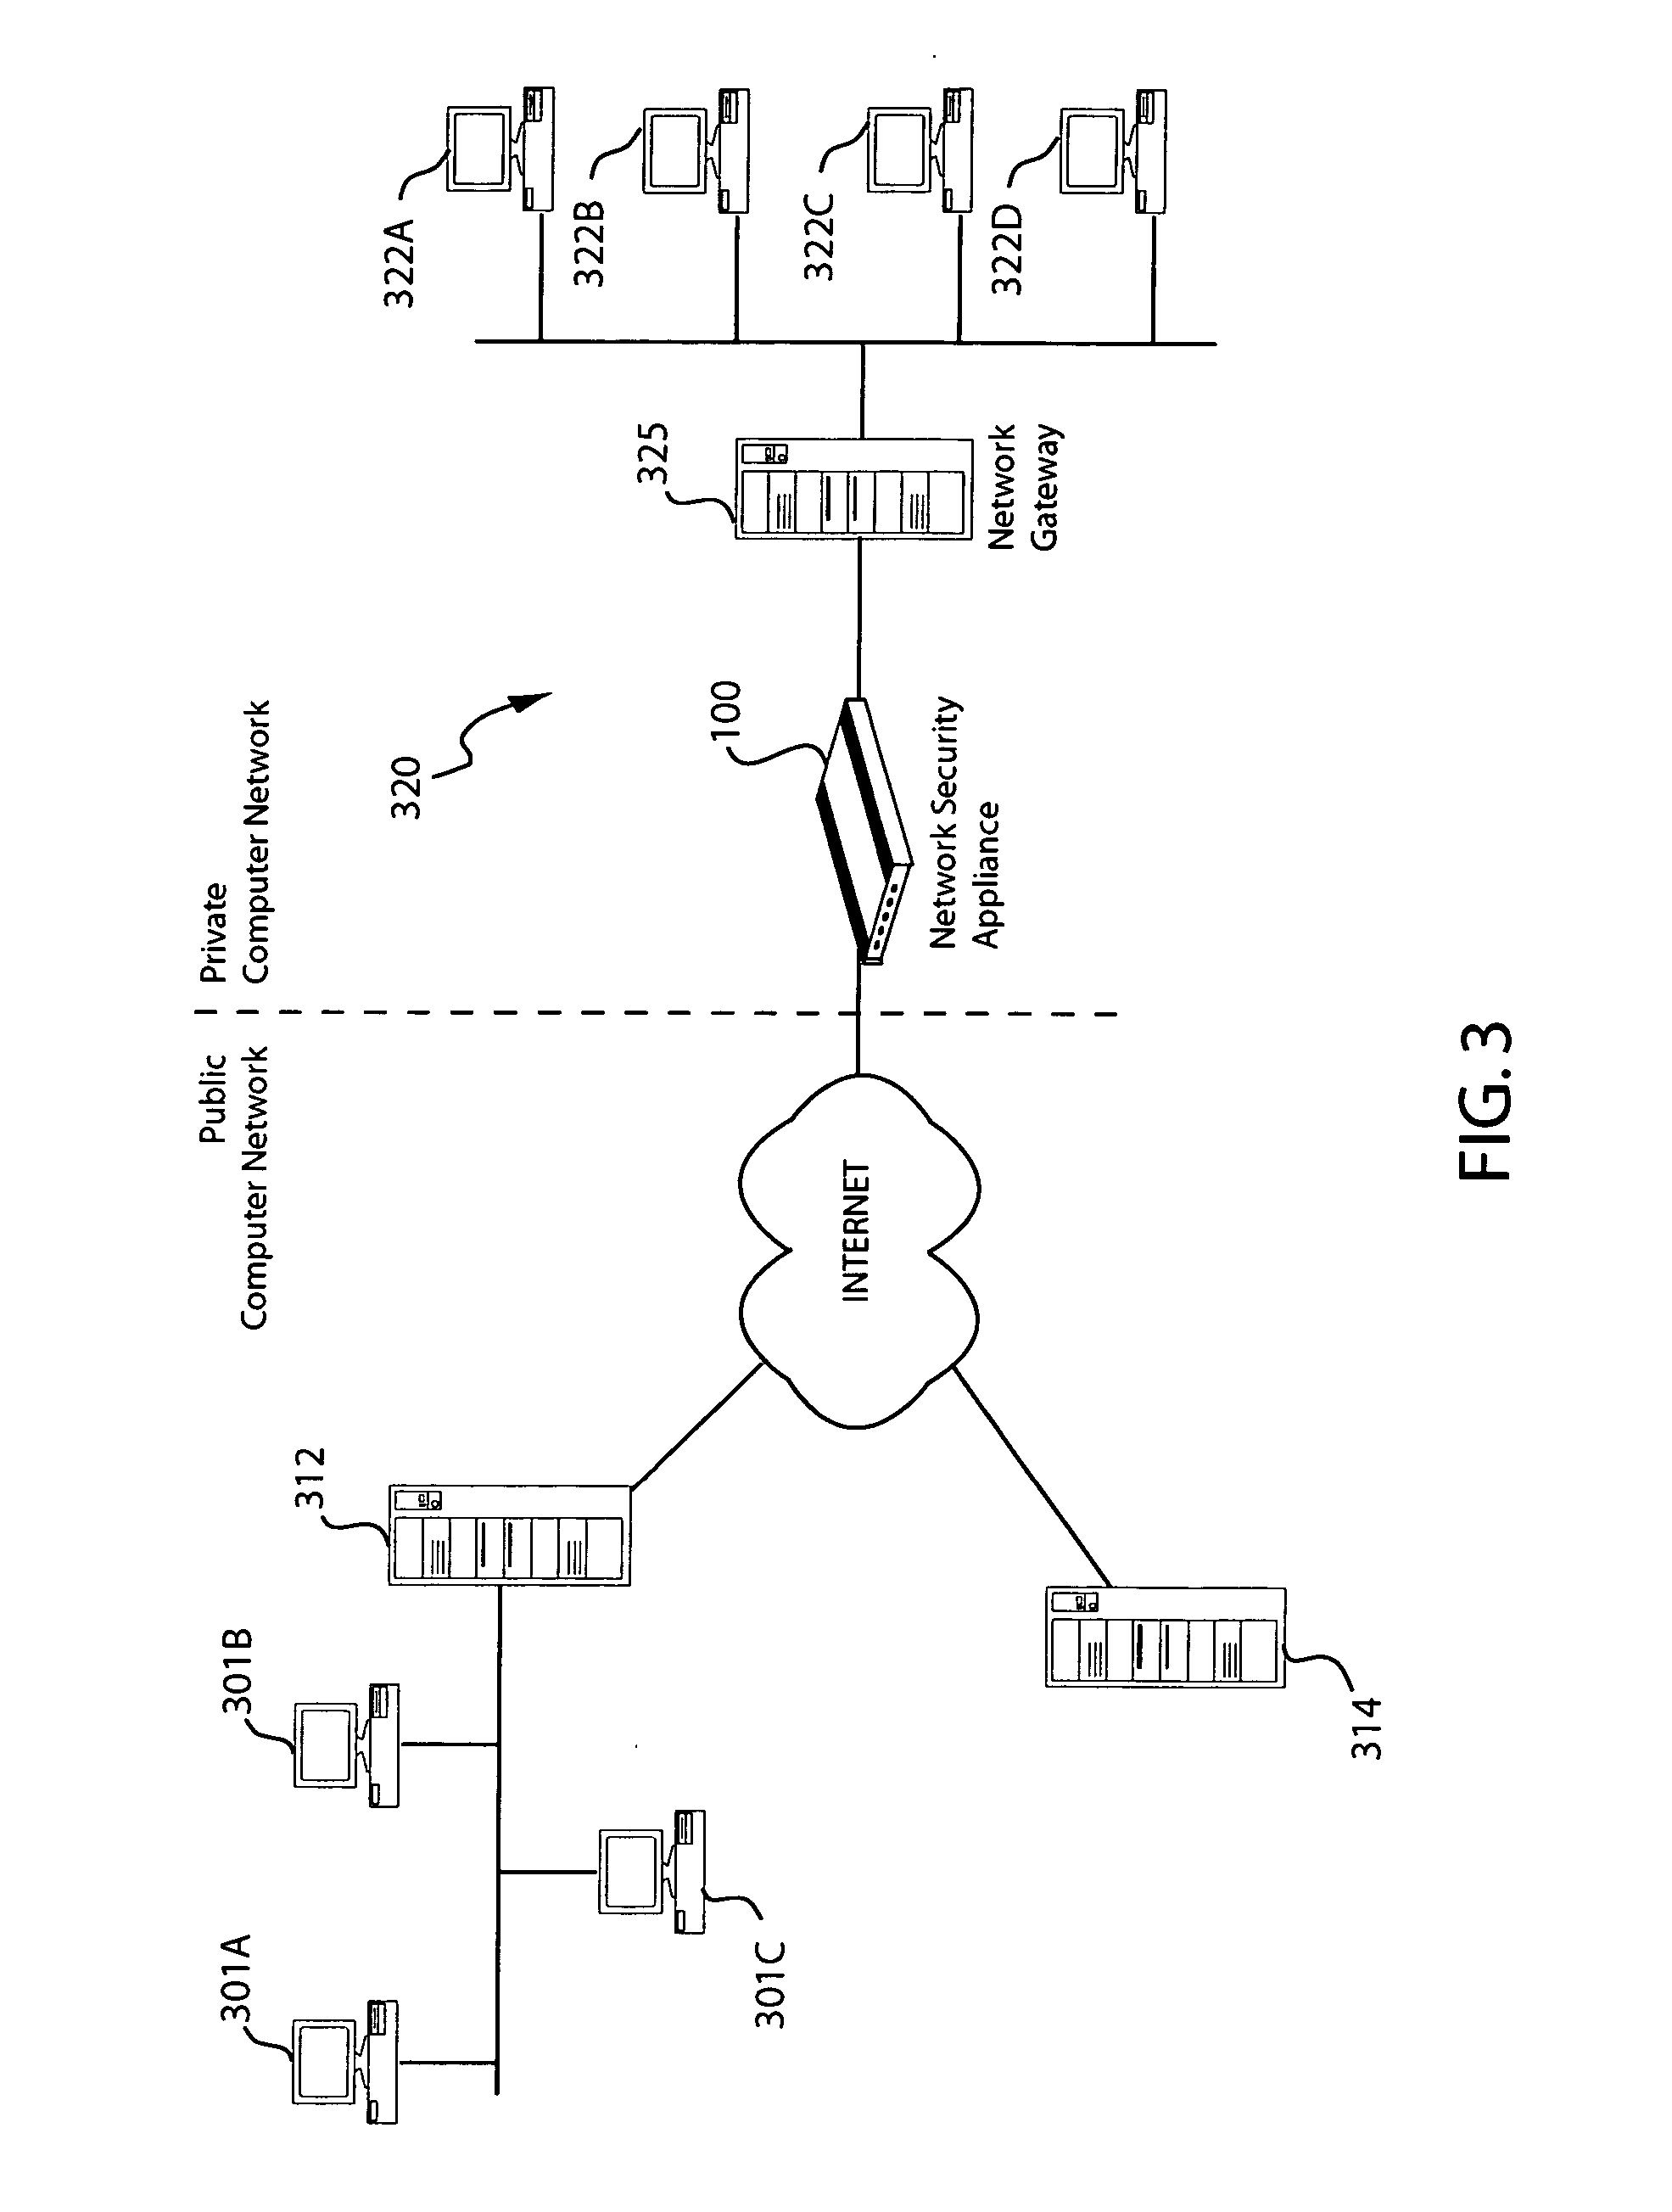 Method and apparatus for securing a computer network